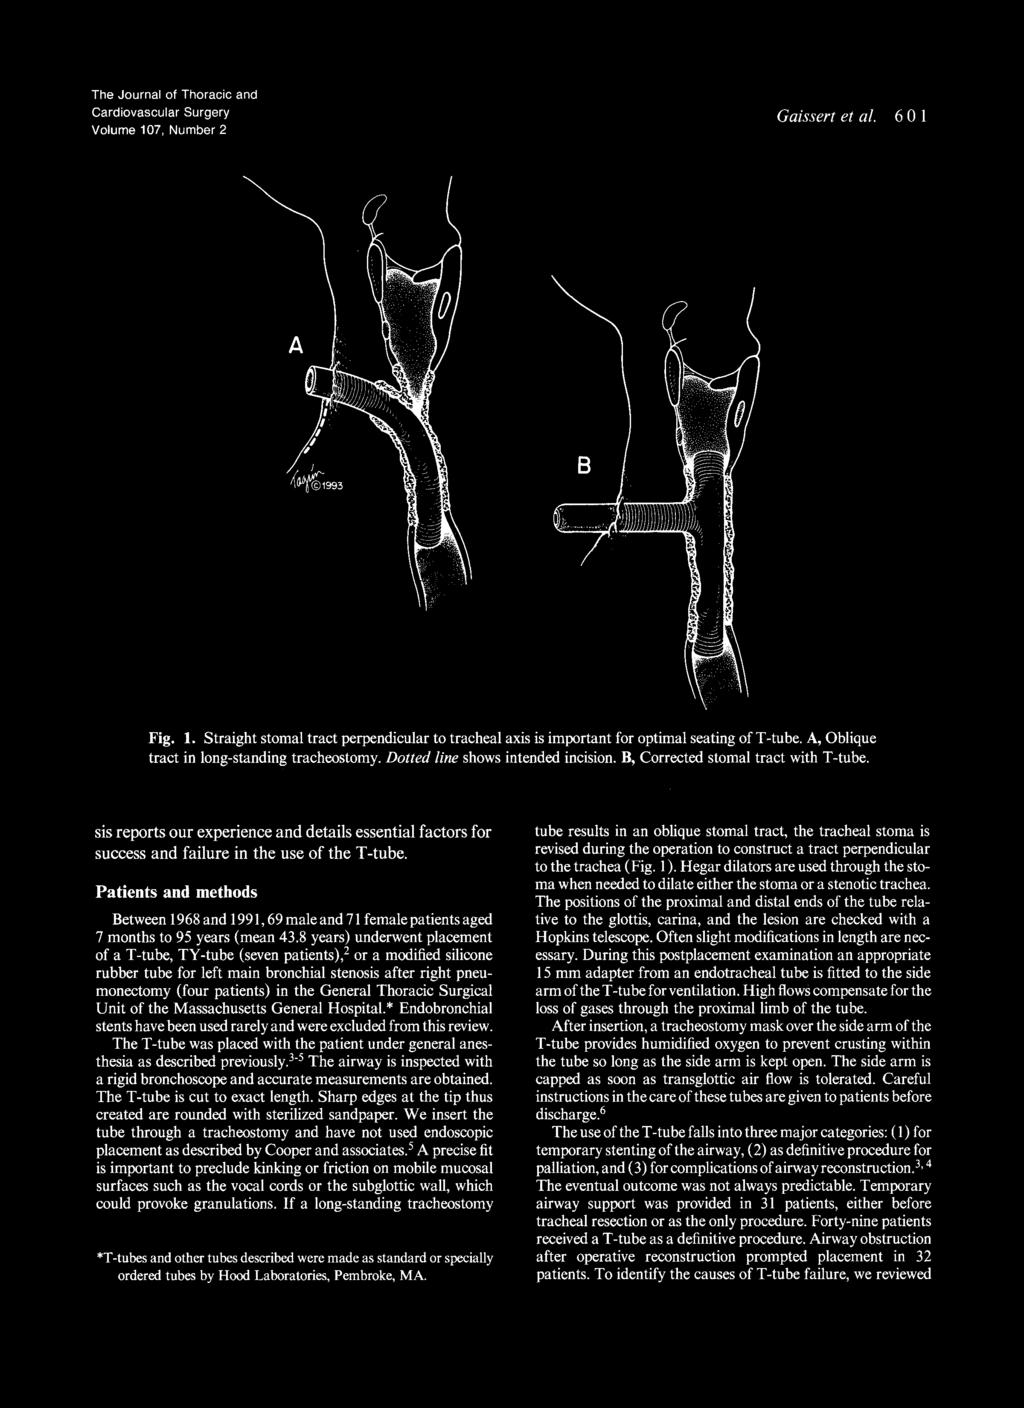 The Journal of Thoracic and Volume 107, Number Gaissert et al. 6 0 1 Fig. 1. Straight stomal tract perpendicular to tracheal axis is important for optimal seating of T -tube.